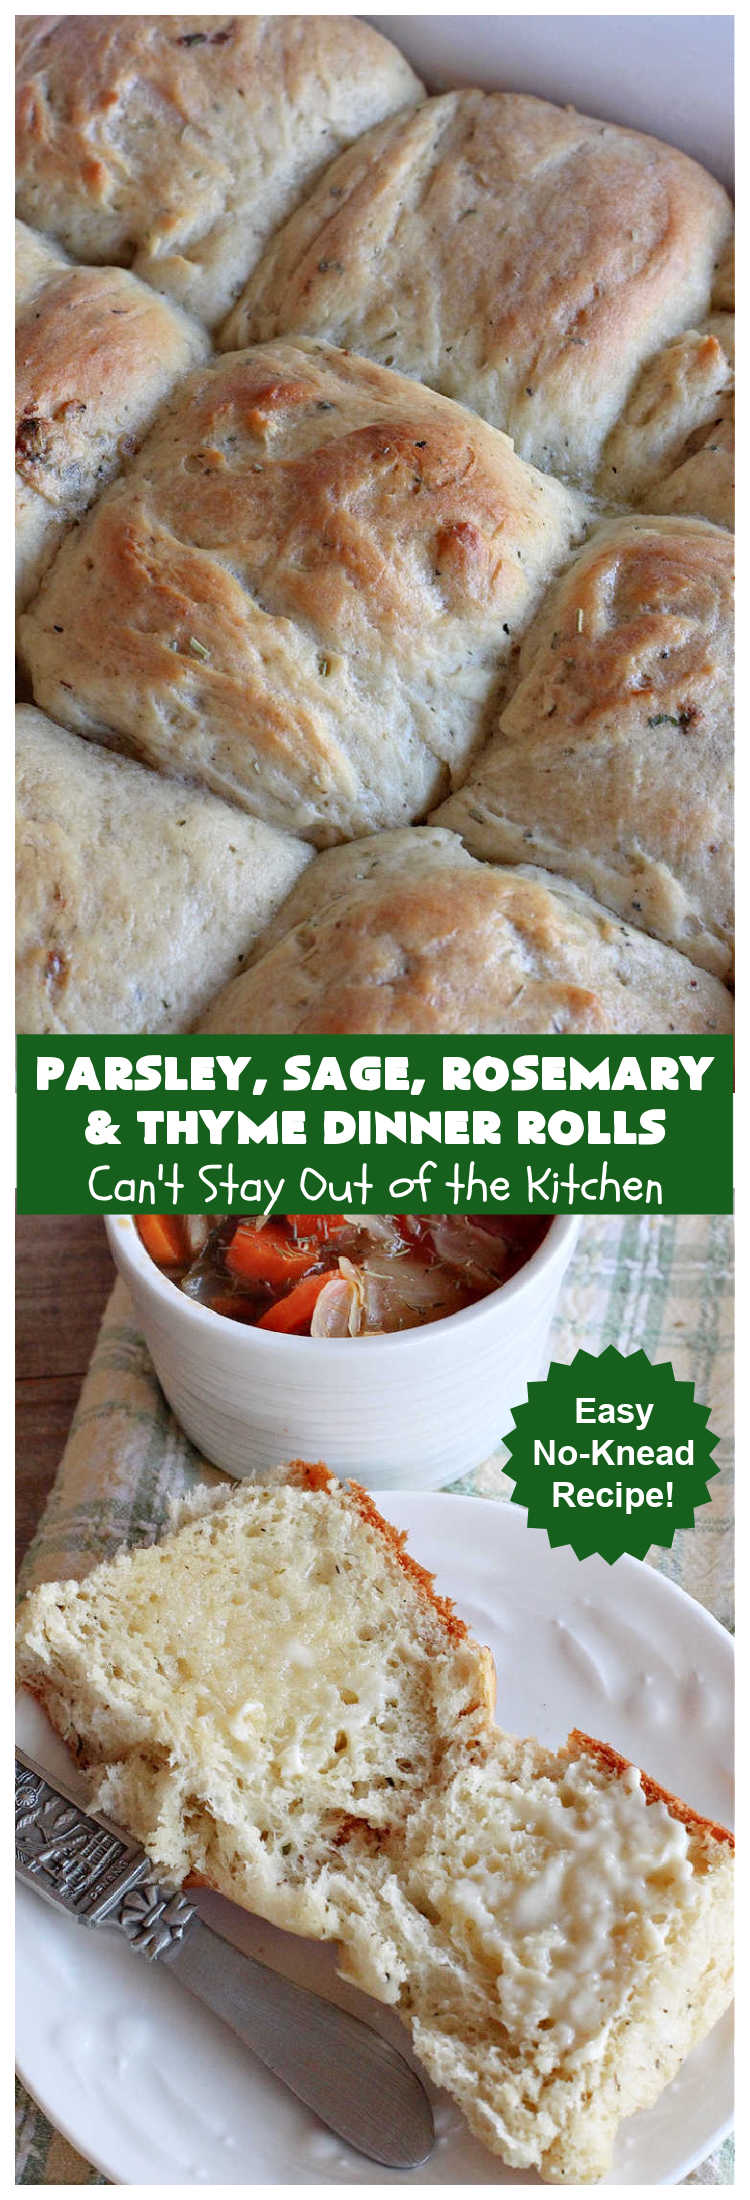 Parsley, Sage, Rosemary & Thyme Dinner Rolls | Can't Stay Out of the Kitchen | these #DinnerRolls are amazing! This #recipe does not have to be kneaded since it's done in the #breadmaker!. The #rolls are seasoned with #parsley, #sage, #rosemary & #thyme for maximum flavor & deliciousness. Perfect to serve with hot soup or chili. Excellent for family, company or #holiday dinners. #bread #ParsleySageRosemaryAndThymeDinnerRolls #NoKneadDinnerRolls